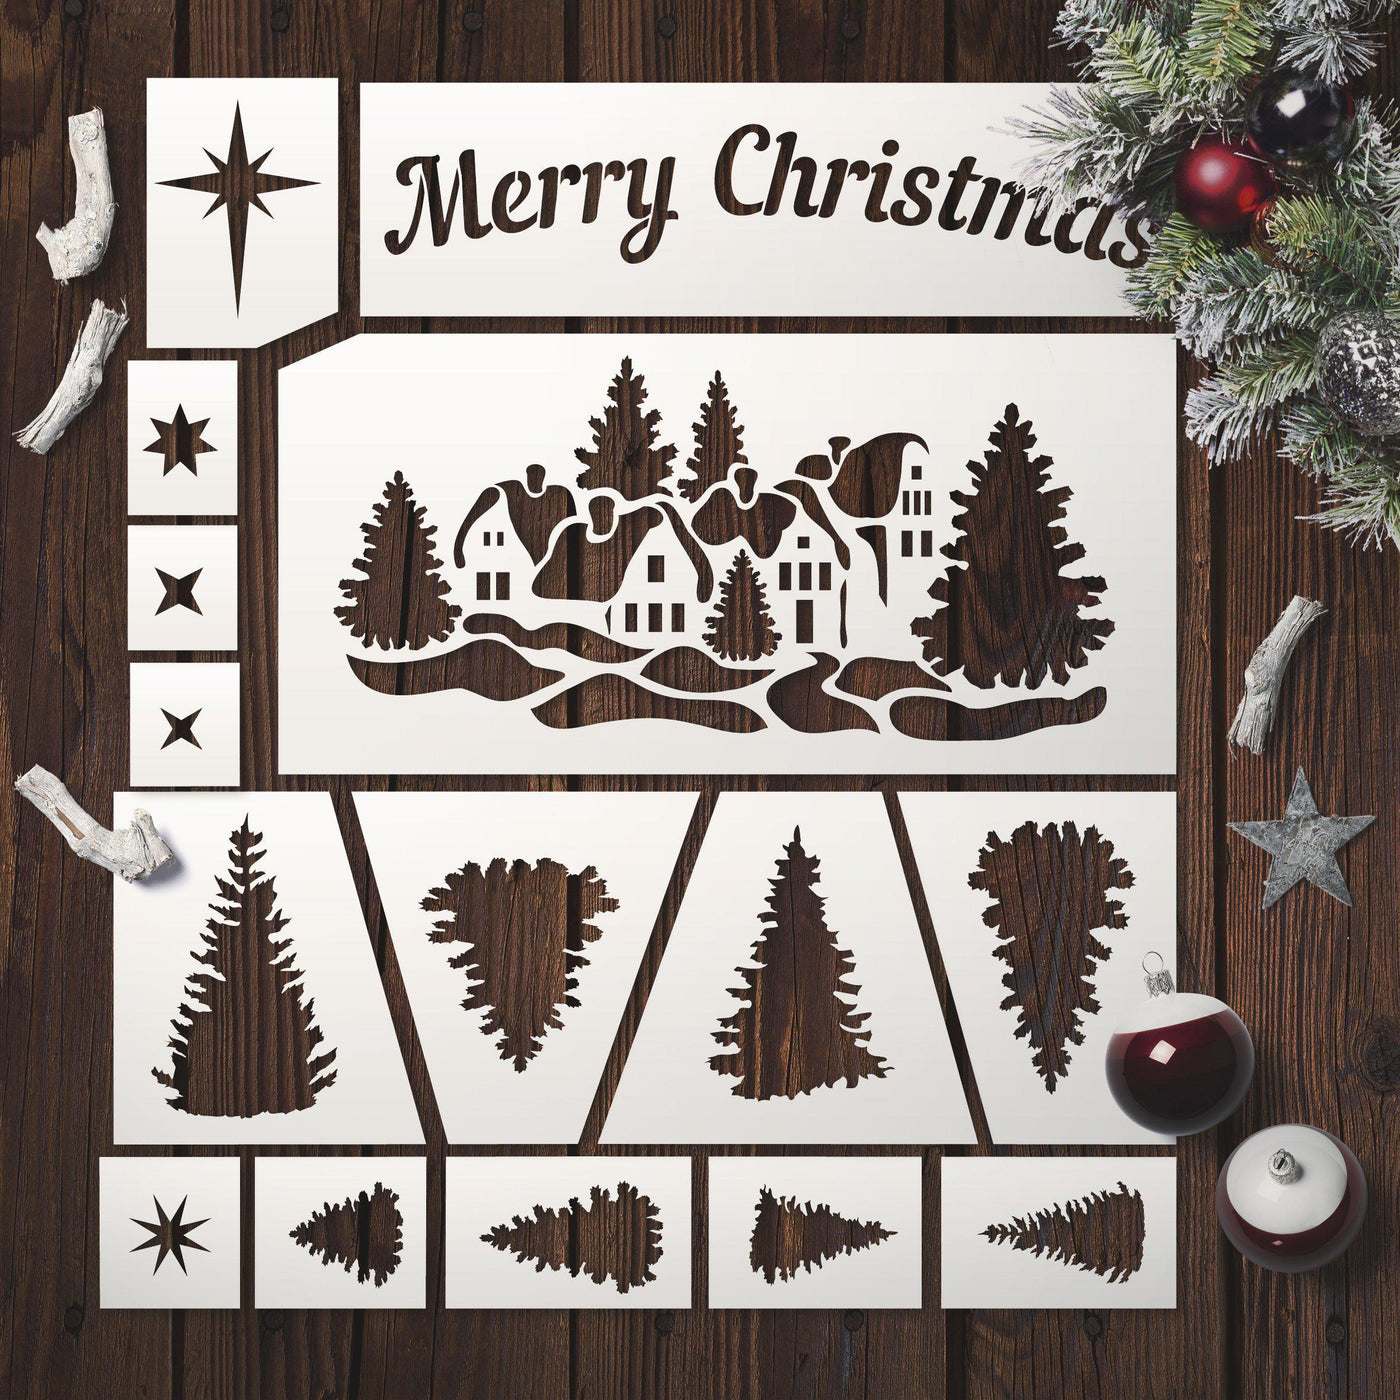 Merry Christmas Stencil Large  Christmas stencils, Merry